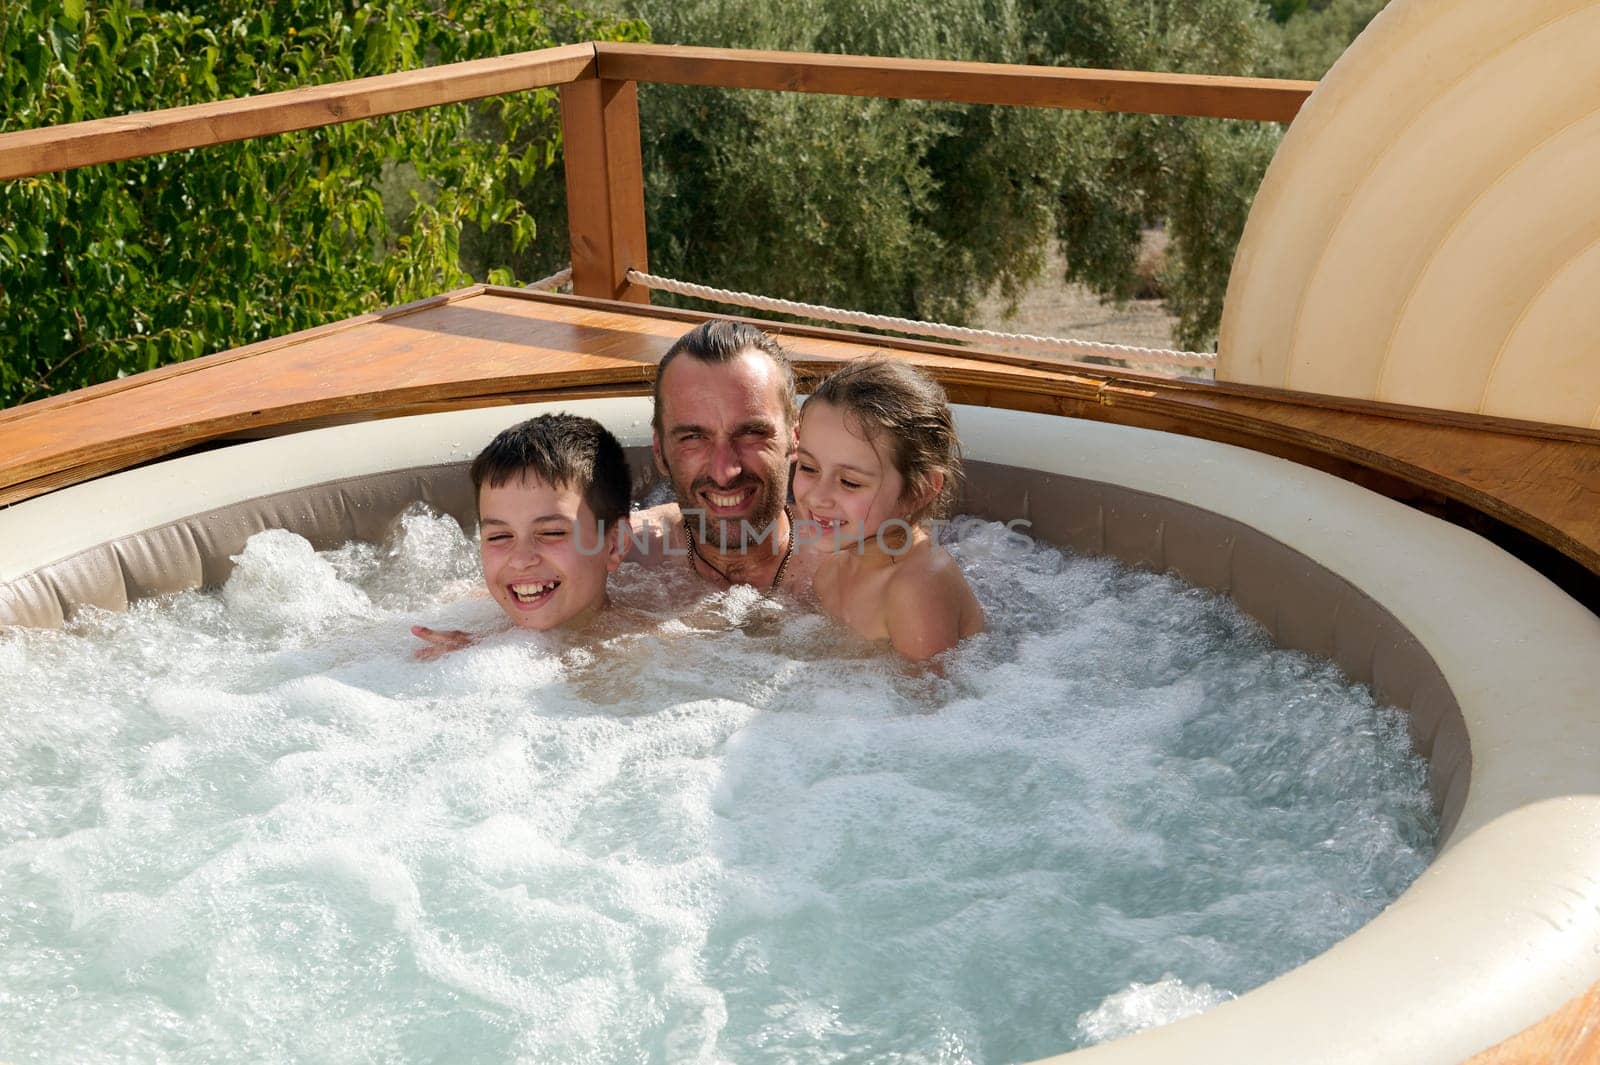 Cheerful loving father hugs his kids, having fun together in outdoor swimming pool, smiling looking at camera. by artgf